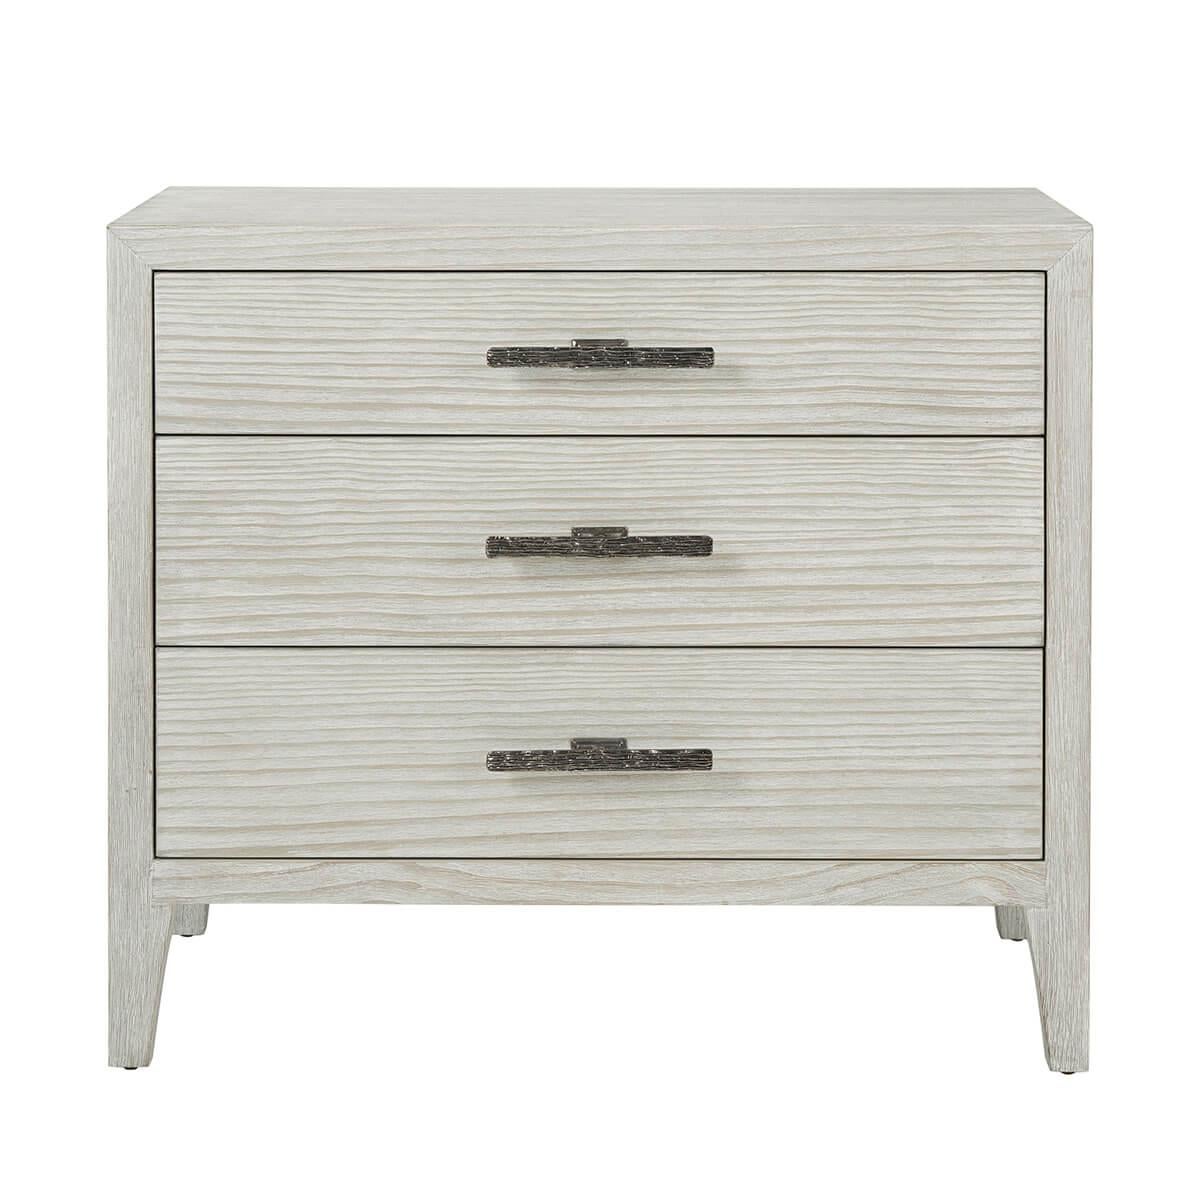 In our Sea Salt finish, the nightstand is constructed using quartered pine accented with uniquely cast ribbed bar hardware in the Dark Sterling finish. Resting on tapered legs with three soft closing drawers.

Dimensions: 32